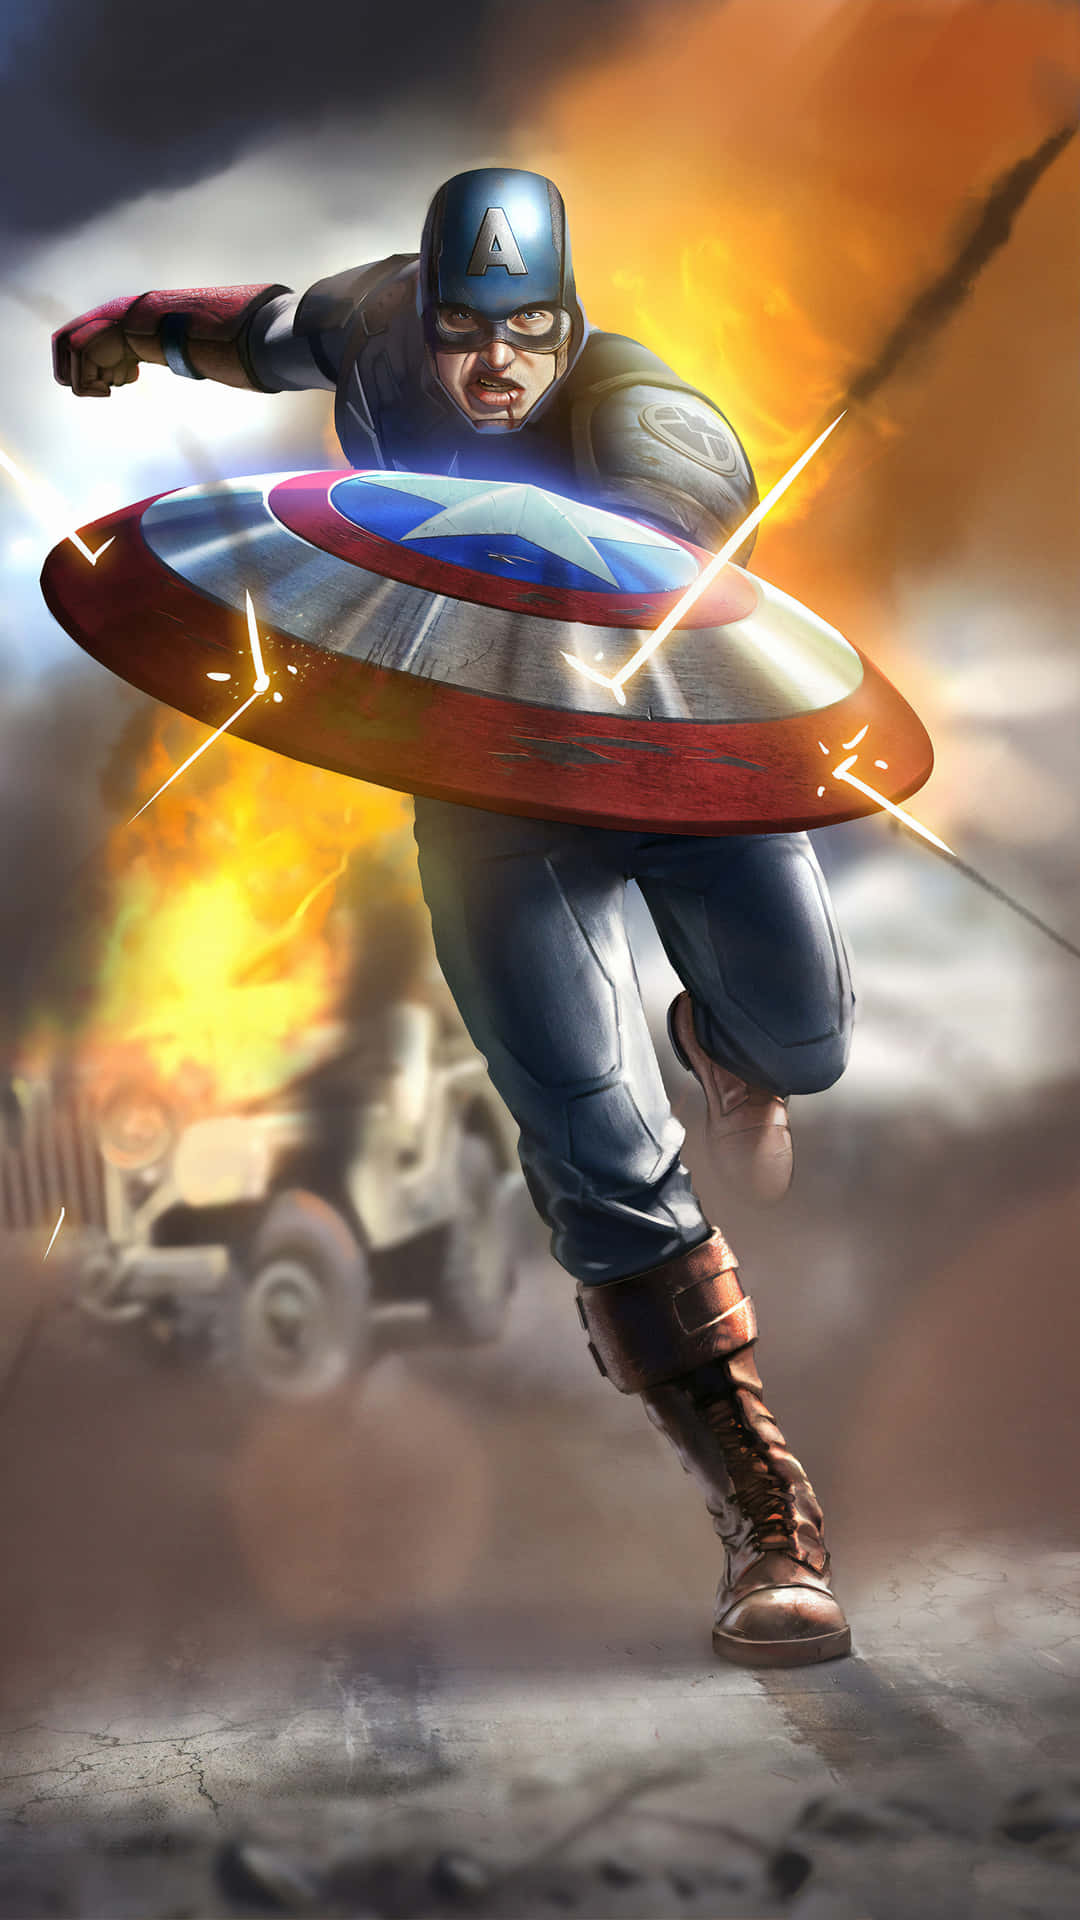 "Suiting Up for Battle - Captain America Prepares to Take on the Enemies of Freedom" Wallpaper